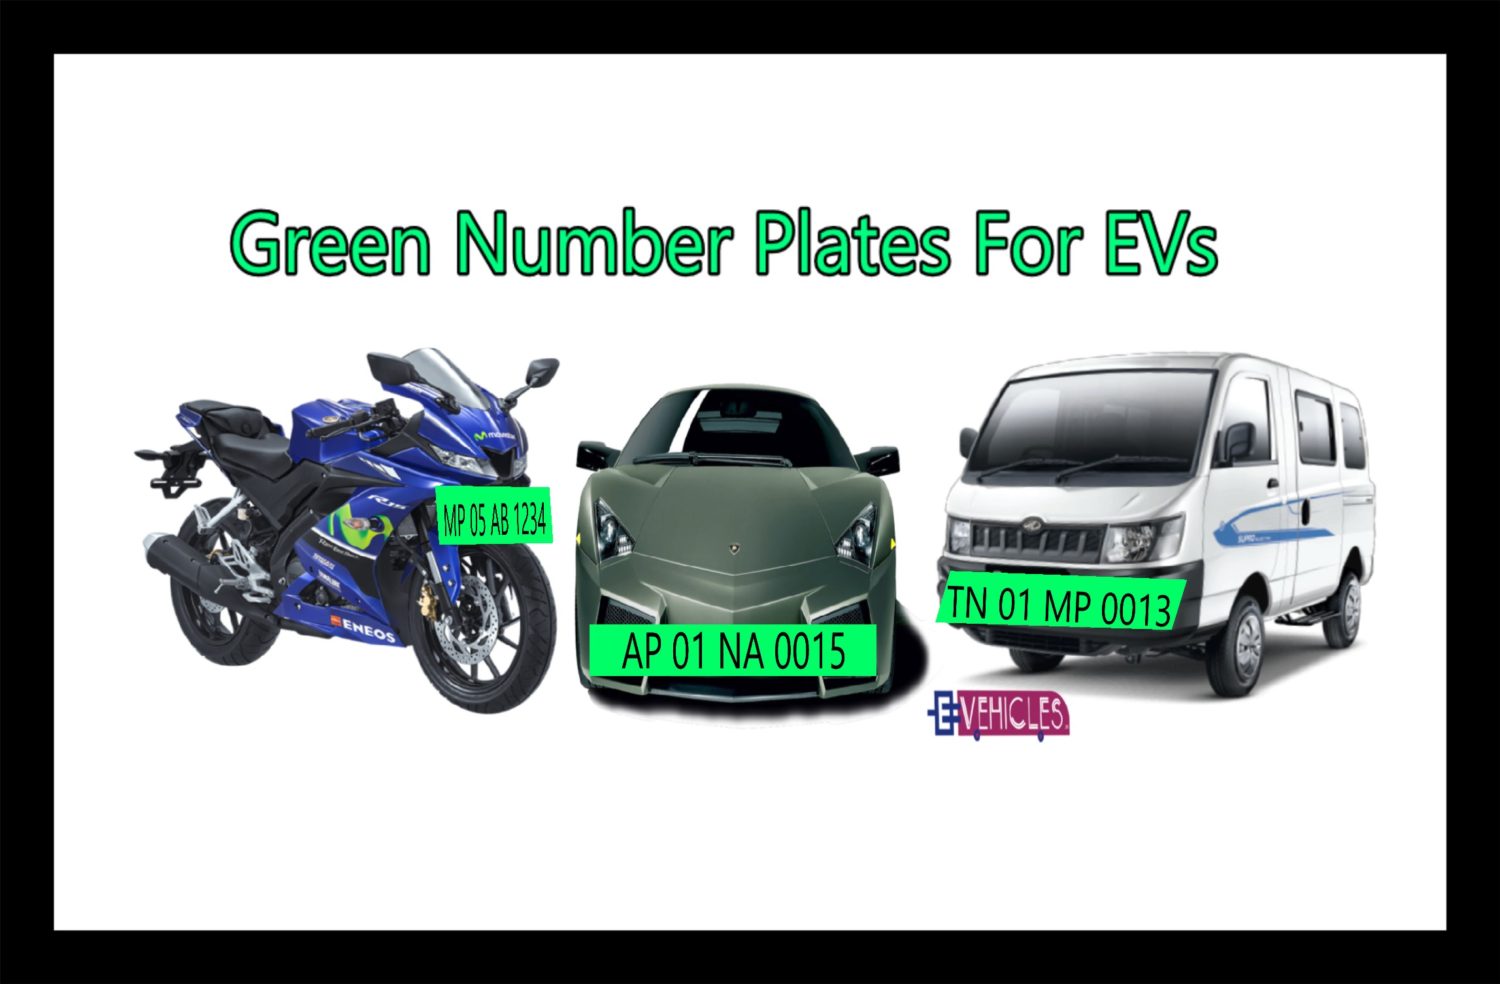 Green Number Plates To Electric Vehicles In India India's best